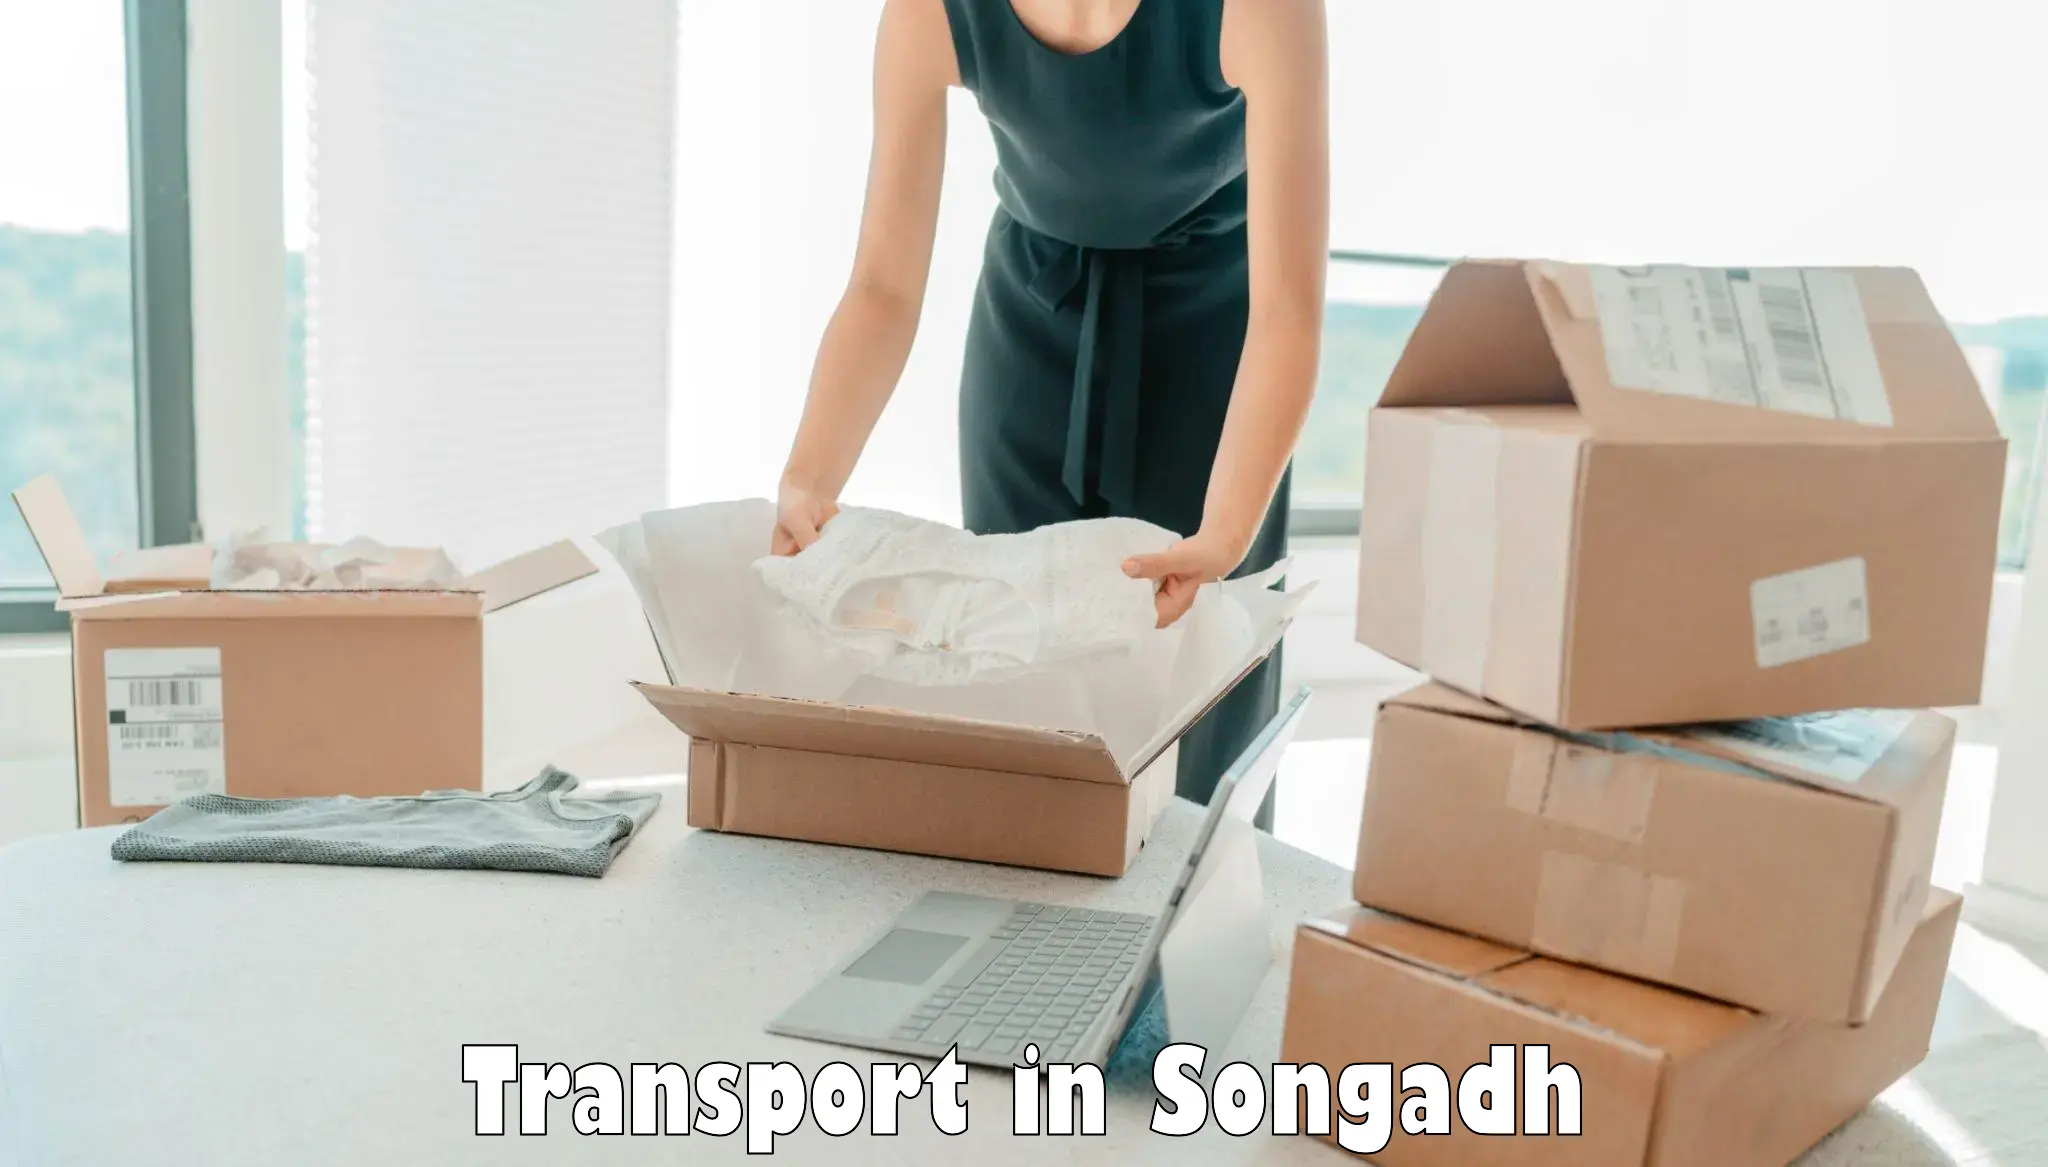 Interstate transport services in Songadh